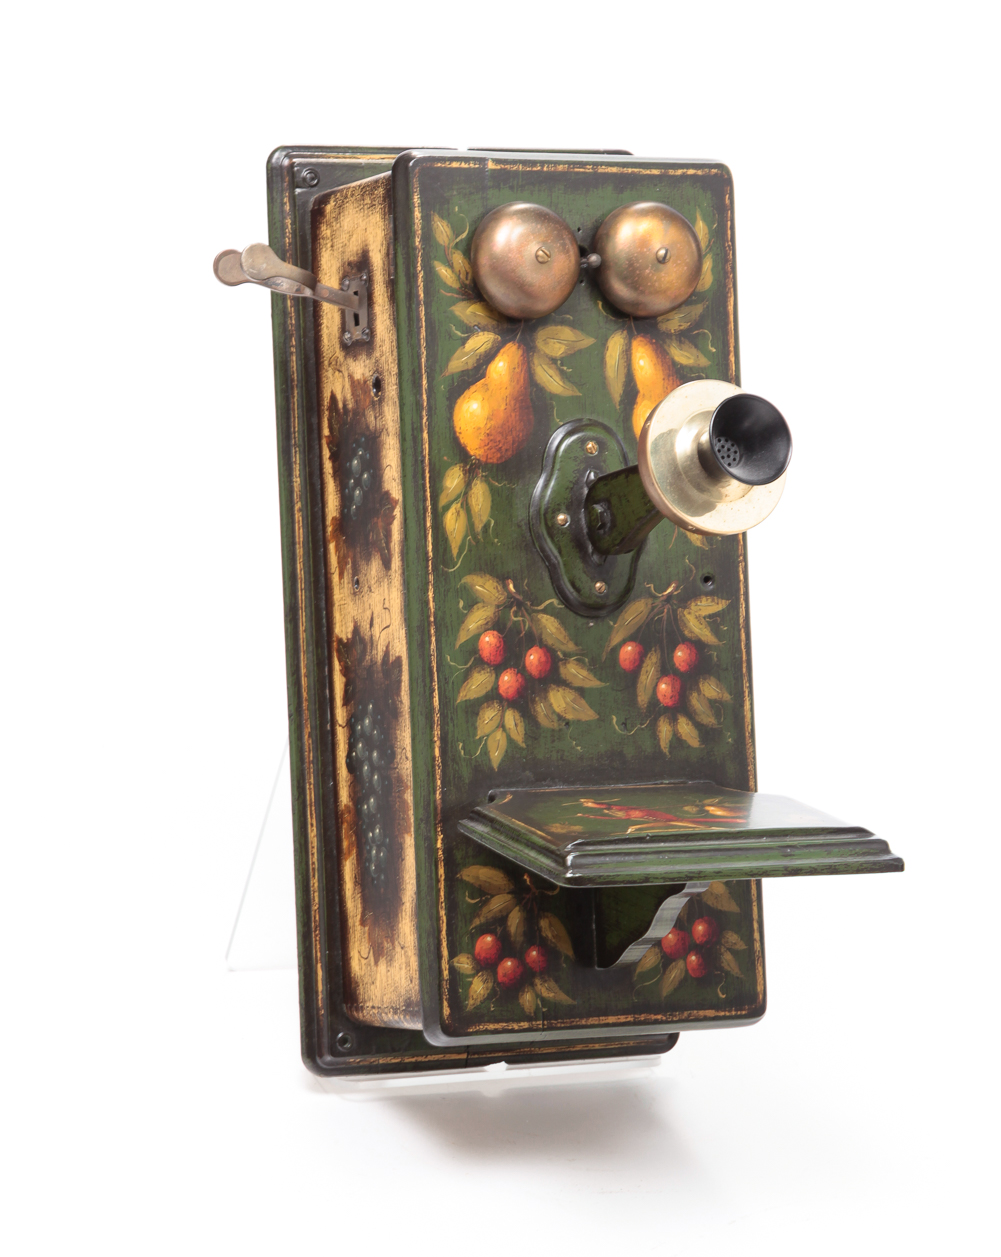 WALL PHONE DECORATED BY W C WREDE  2e00e5